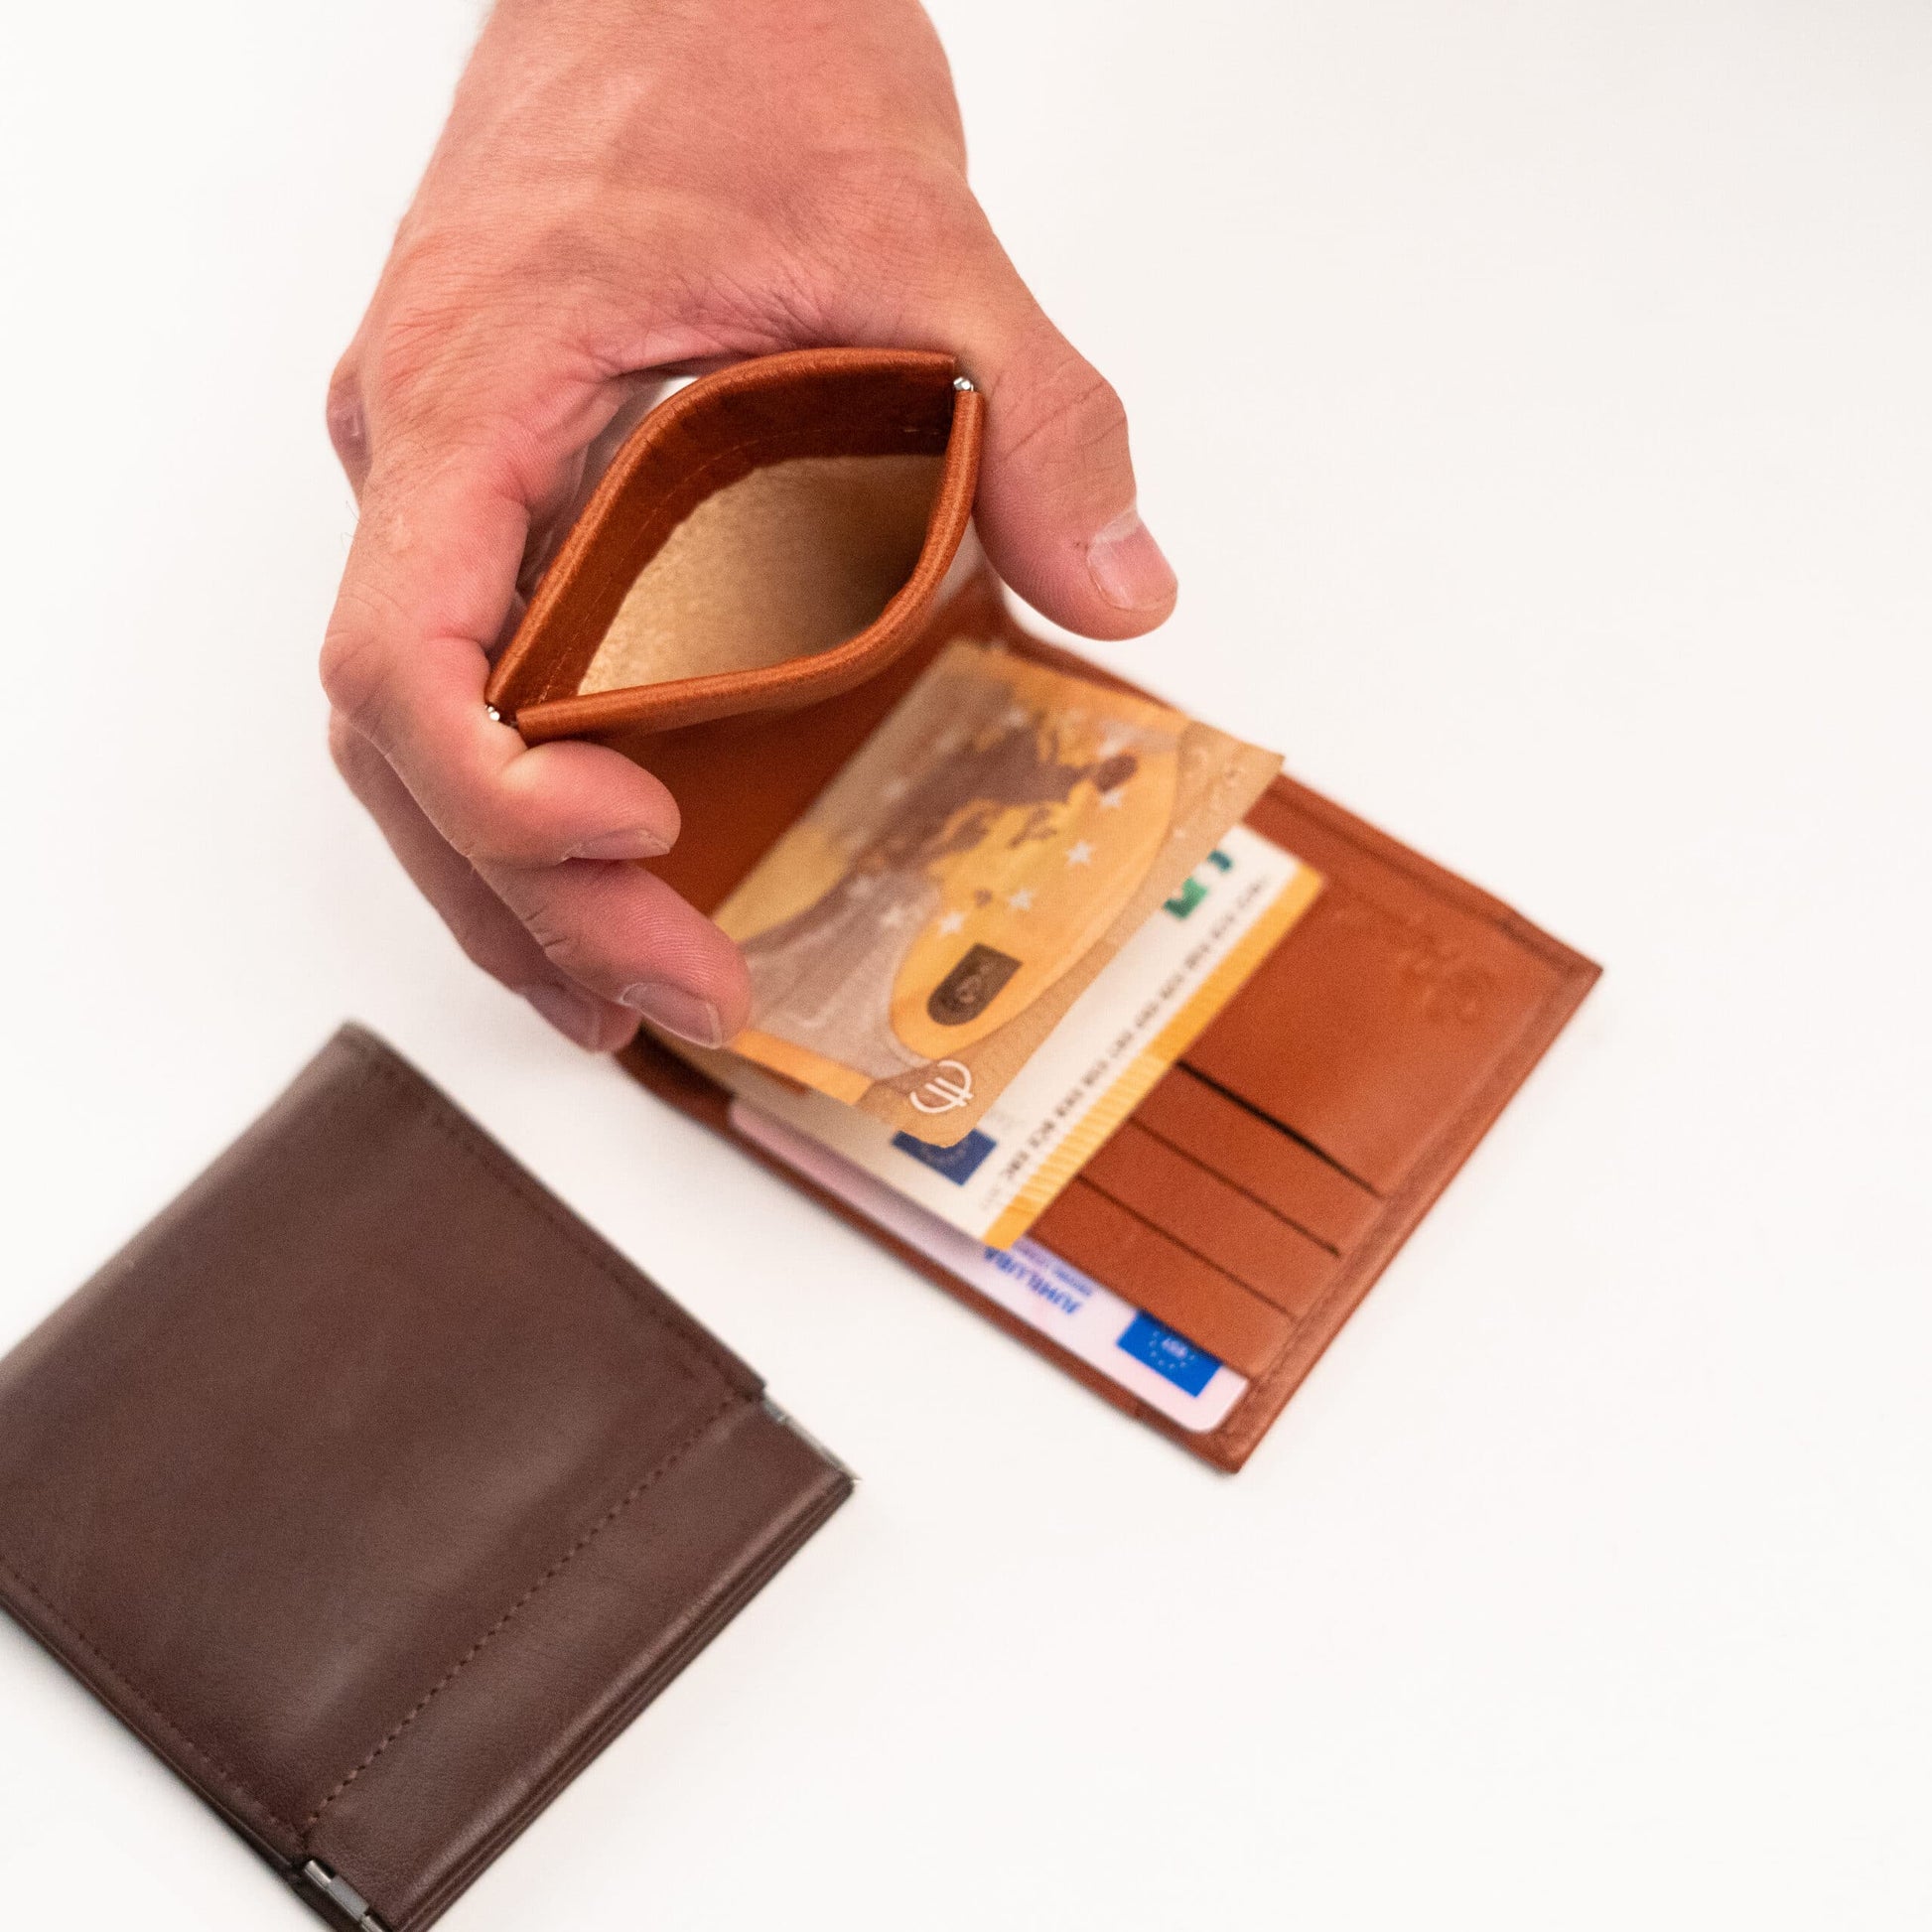 A hand holding a leather wallet with money clip and coin pouch, offering functionality and sophistication. Made from genuine leather in Europe, it includes 9 card slots, 1 ID window, and a metal clip for paper currency. Compact dimensions for easy carrying.